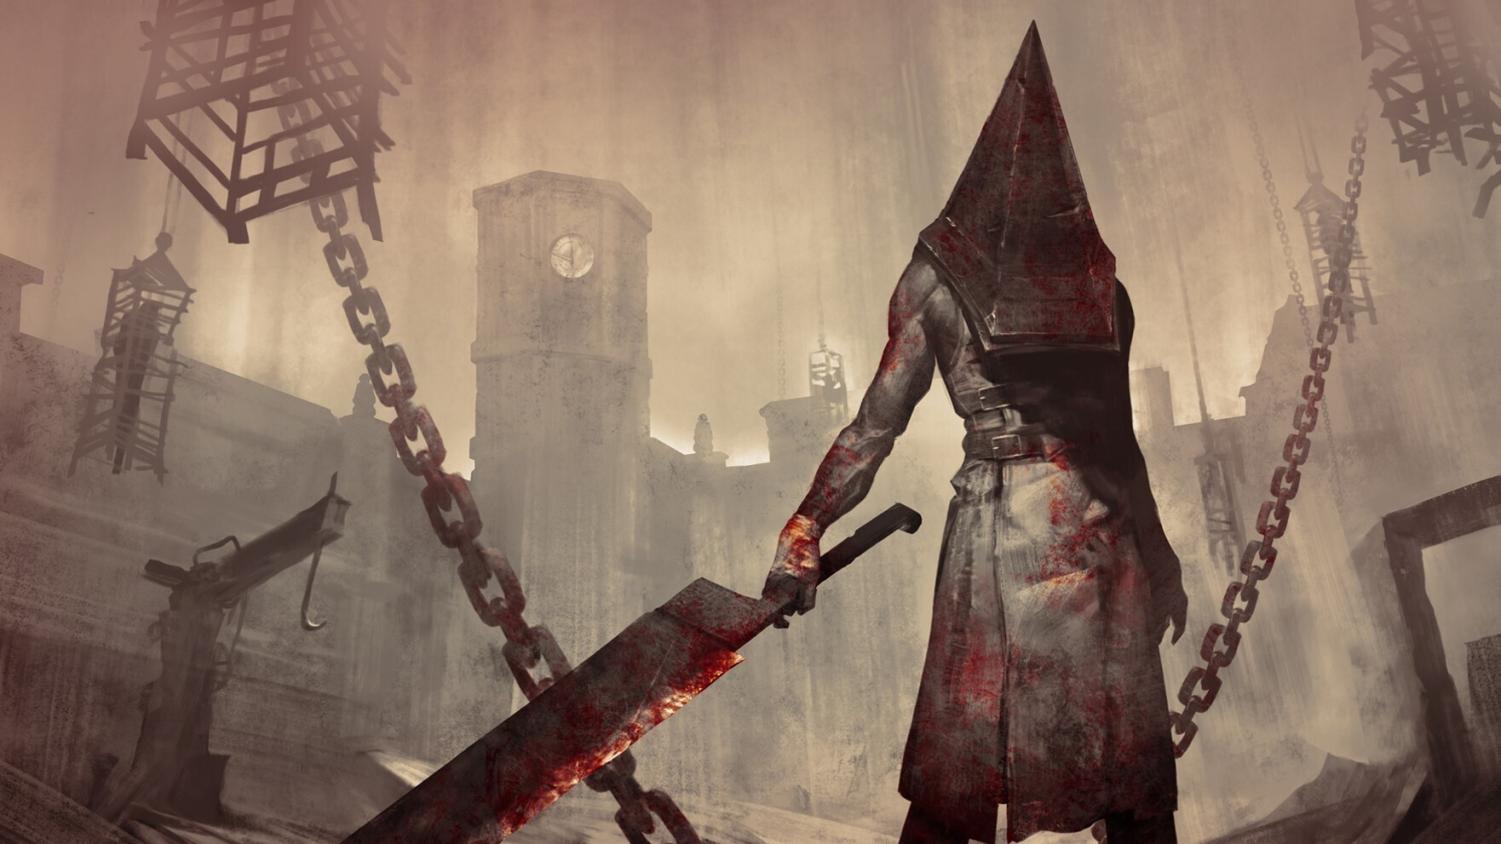 silent hill: Silent Hill 2 Remake: This is what we know so far about  release date, platforms, gameplay, storyline and more - The Economic Times